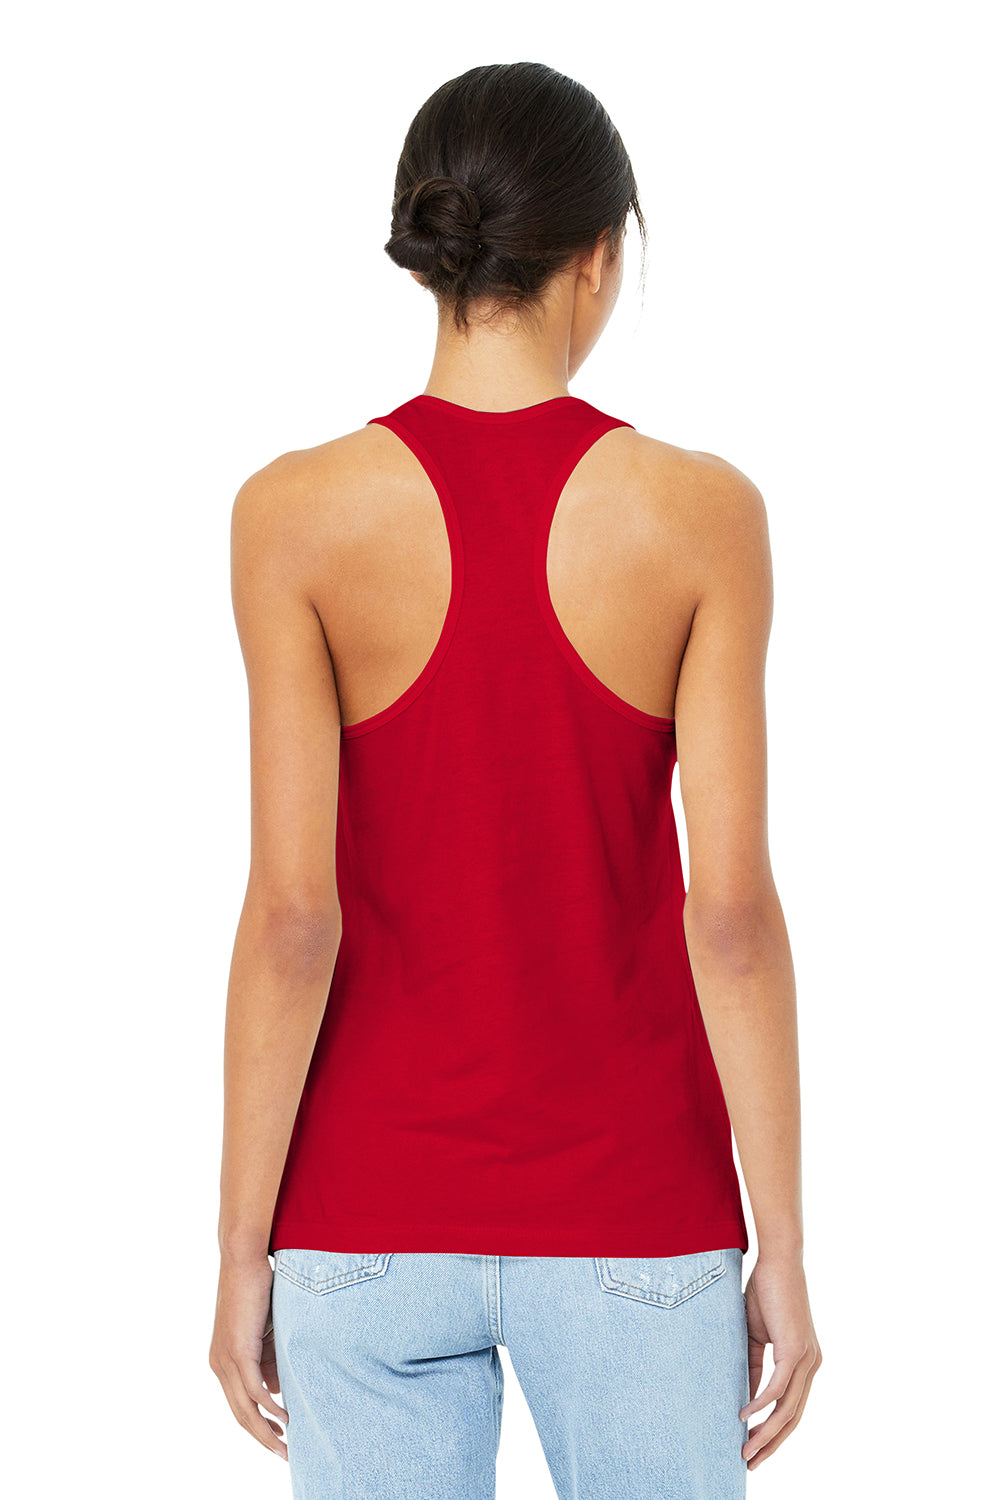 Bella + Canvas BC6008/B6008/6008 Womens Jersey Tank Top Red Model Back